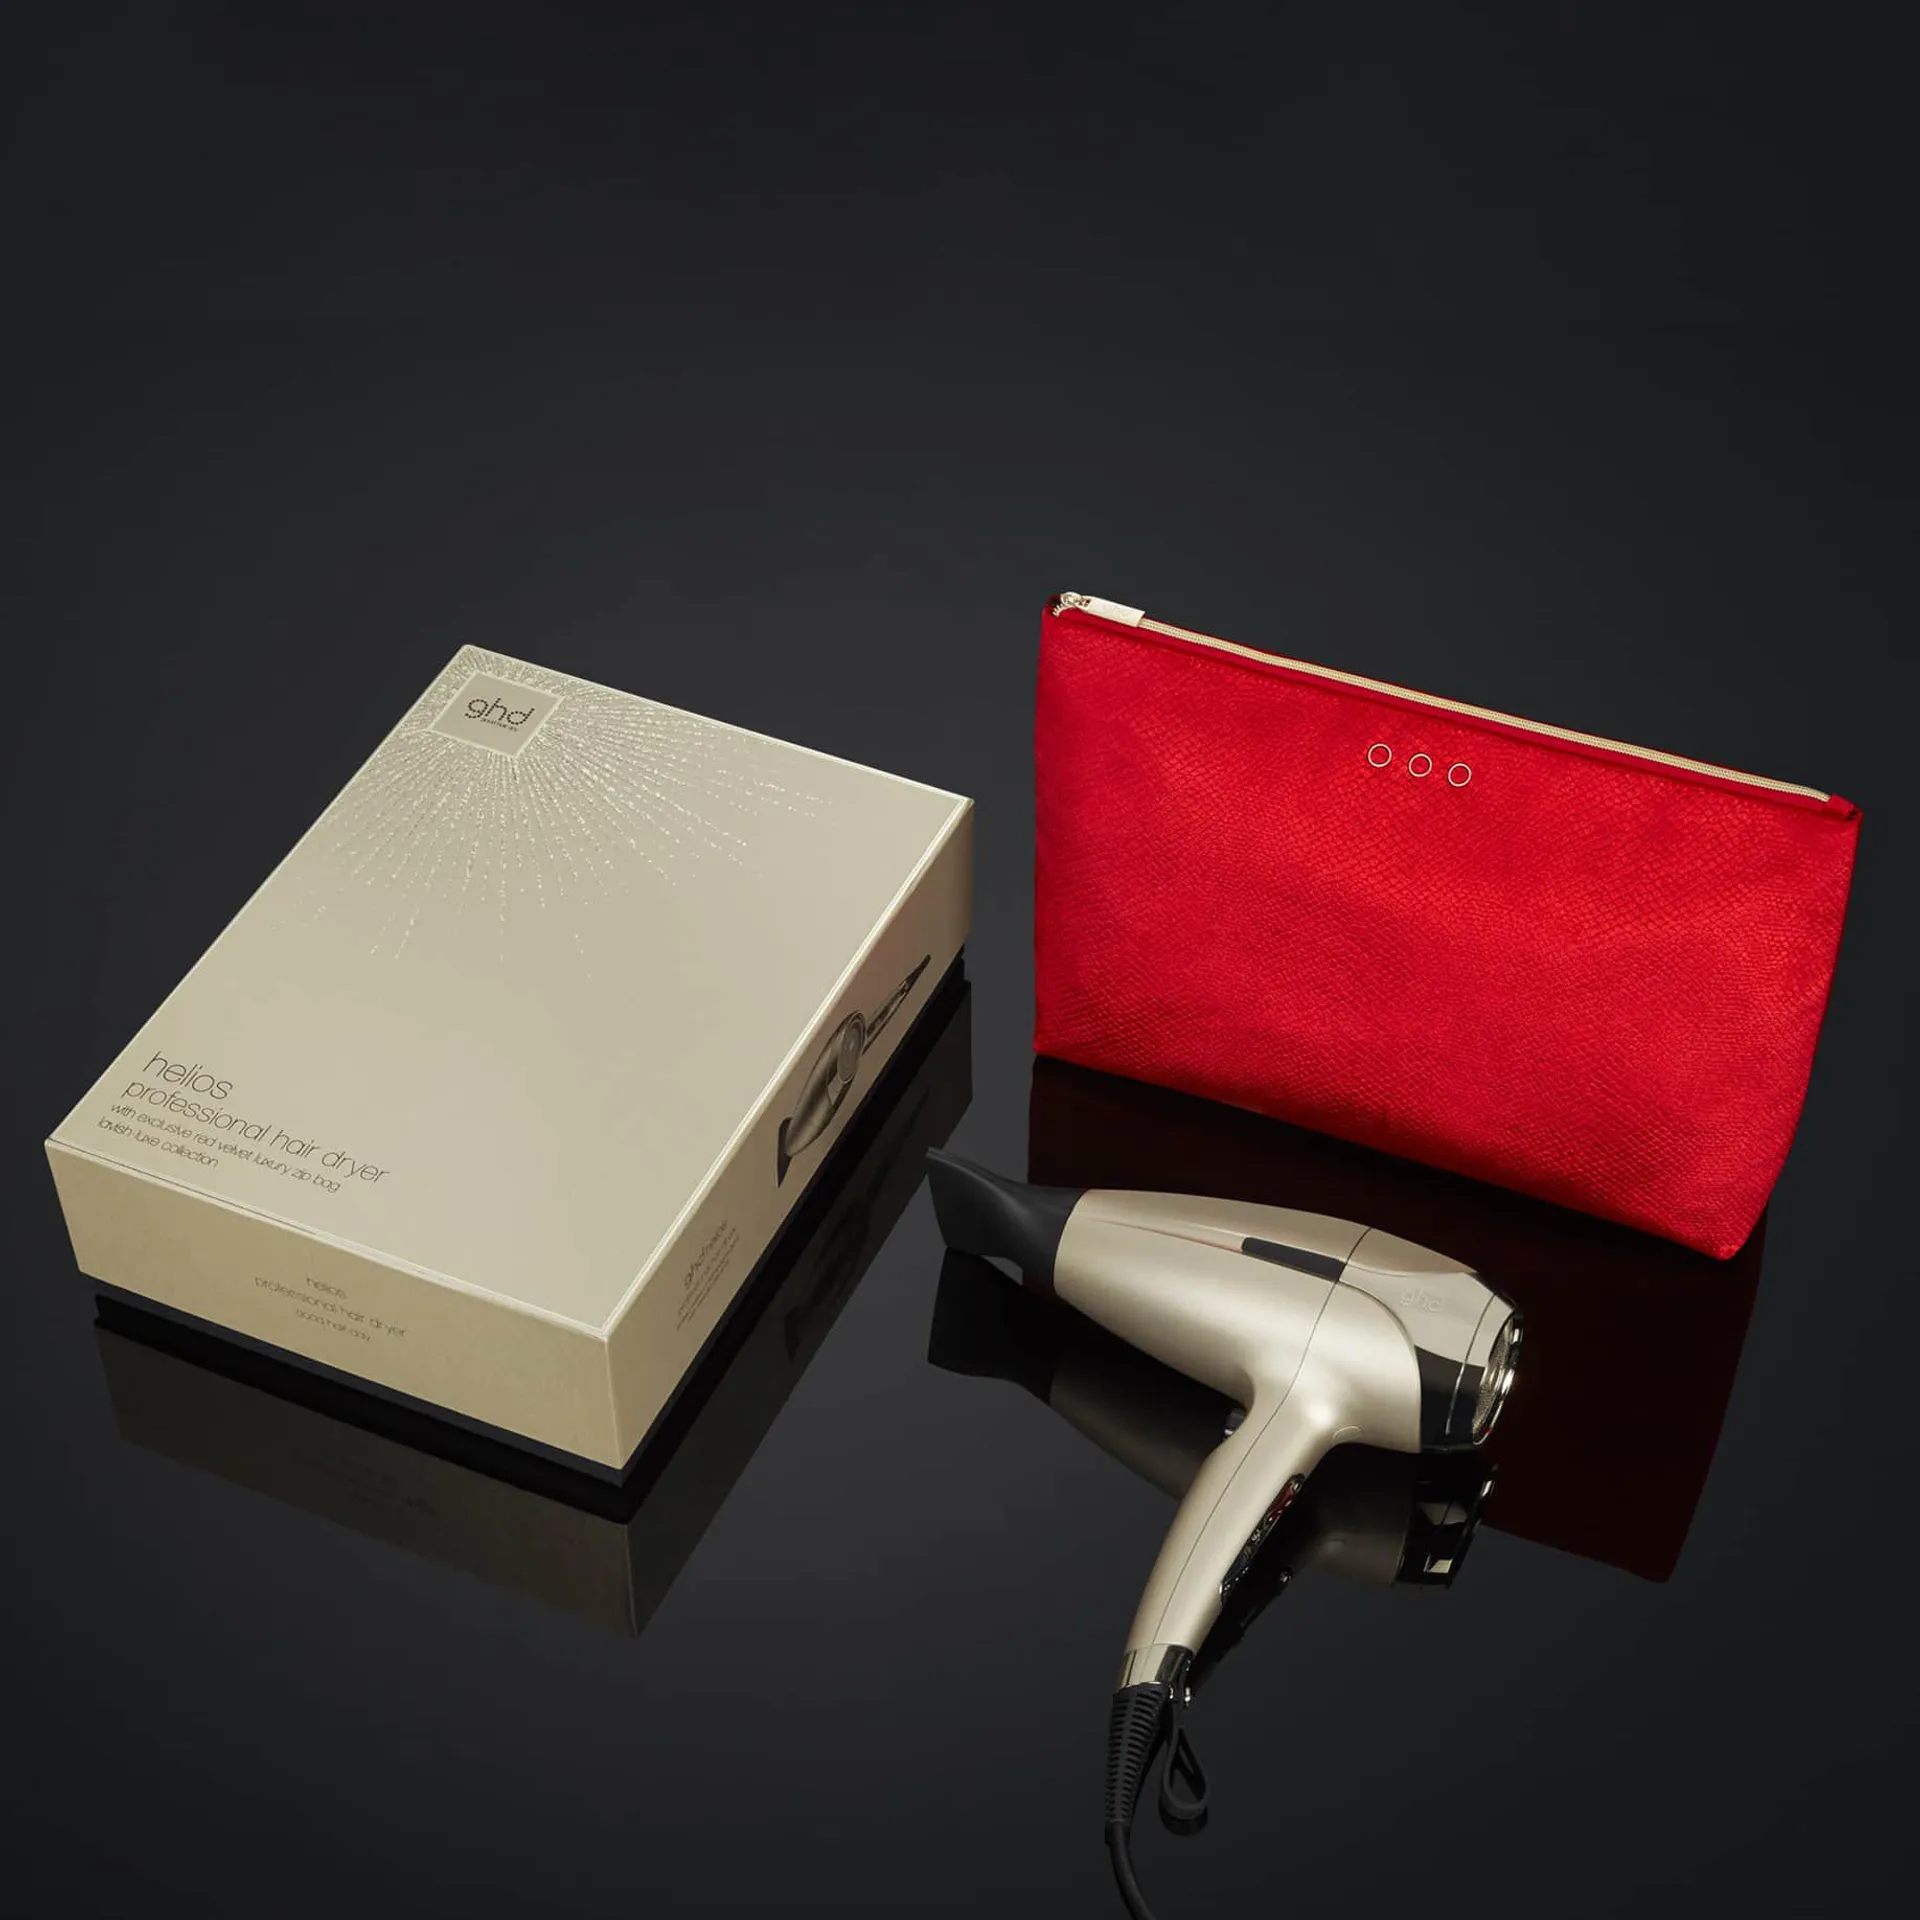 GHD HELIOS™ HAIR DRYER IN CHAMPAGNE GOLD